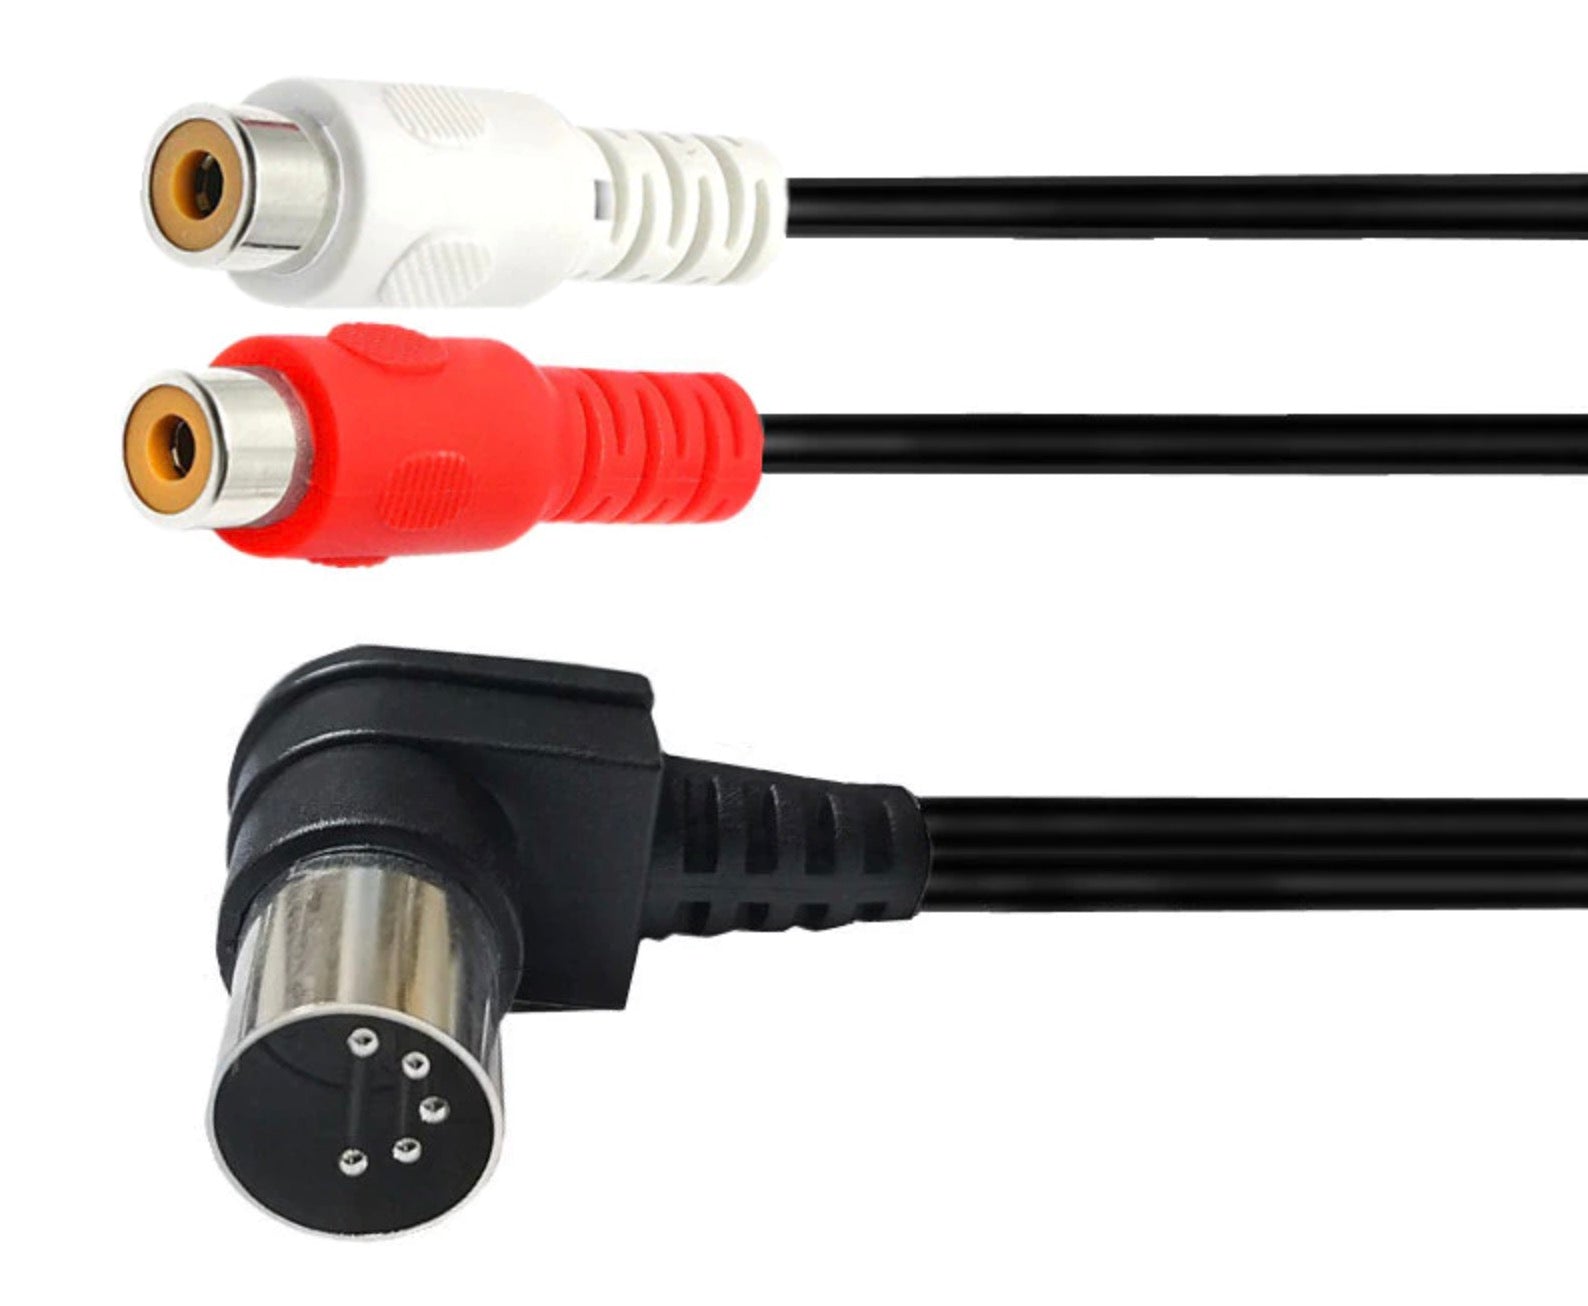 Angled 5-pin Din Male to Dual RCA Female Audio Cable for Bang & Olufsen, Naim, Stereo Systems